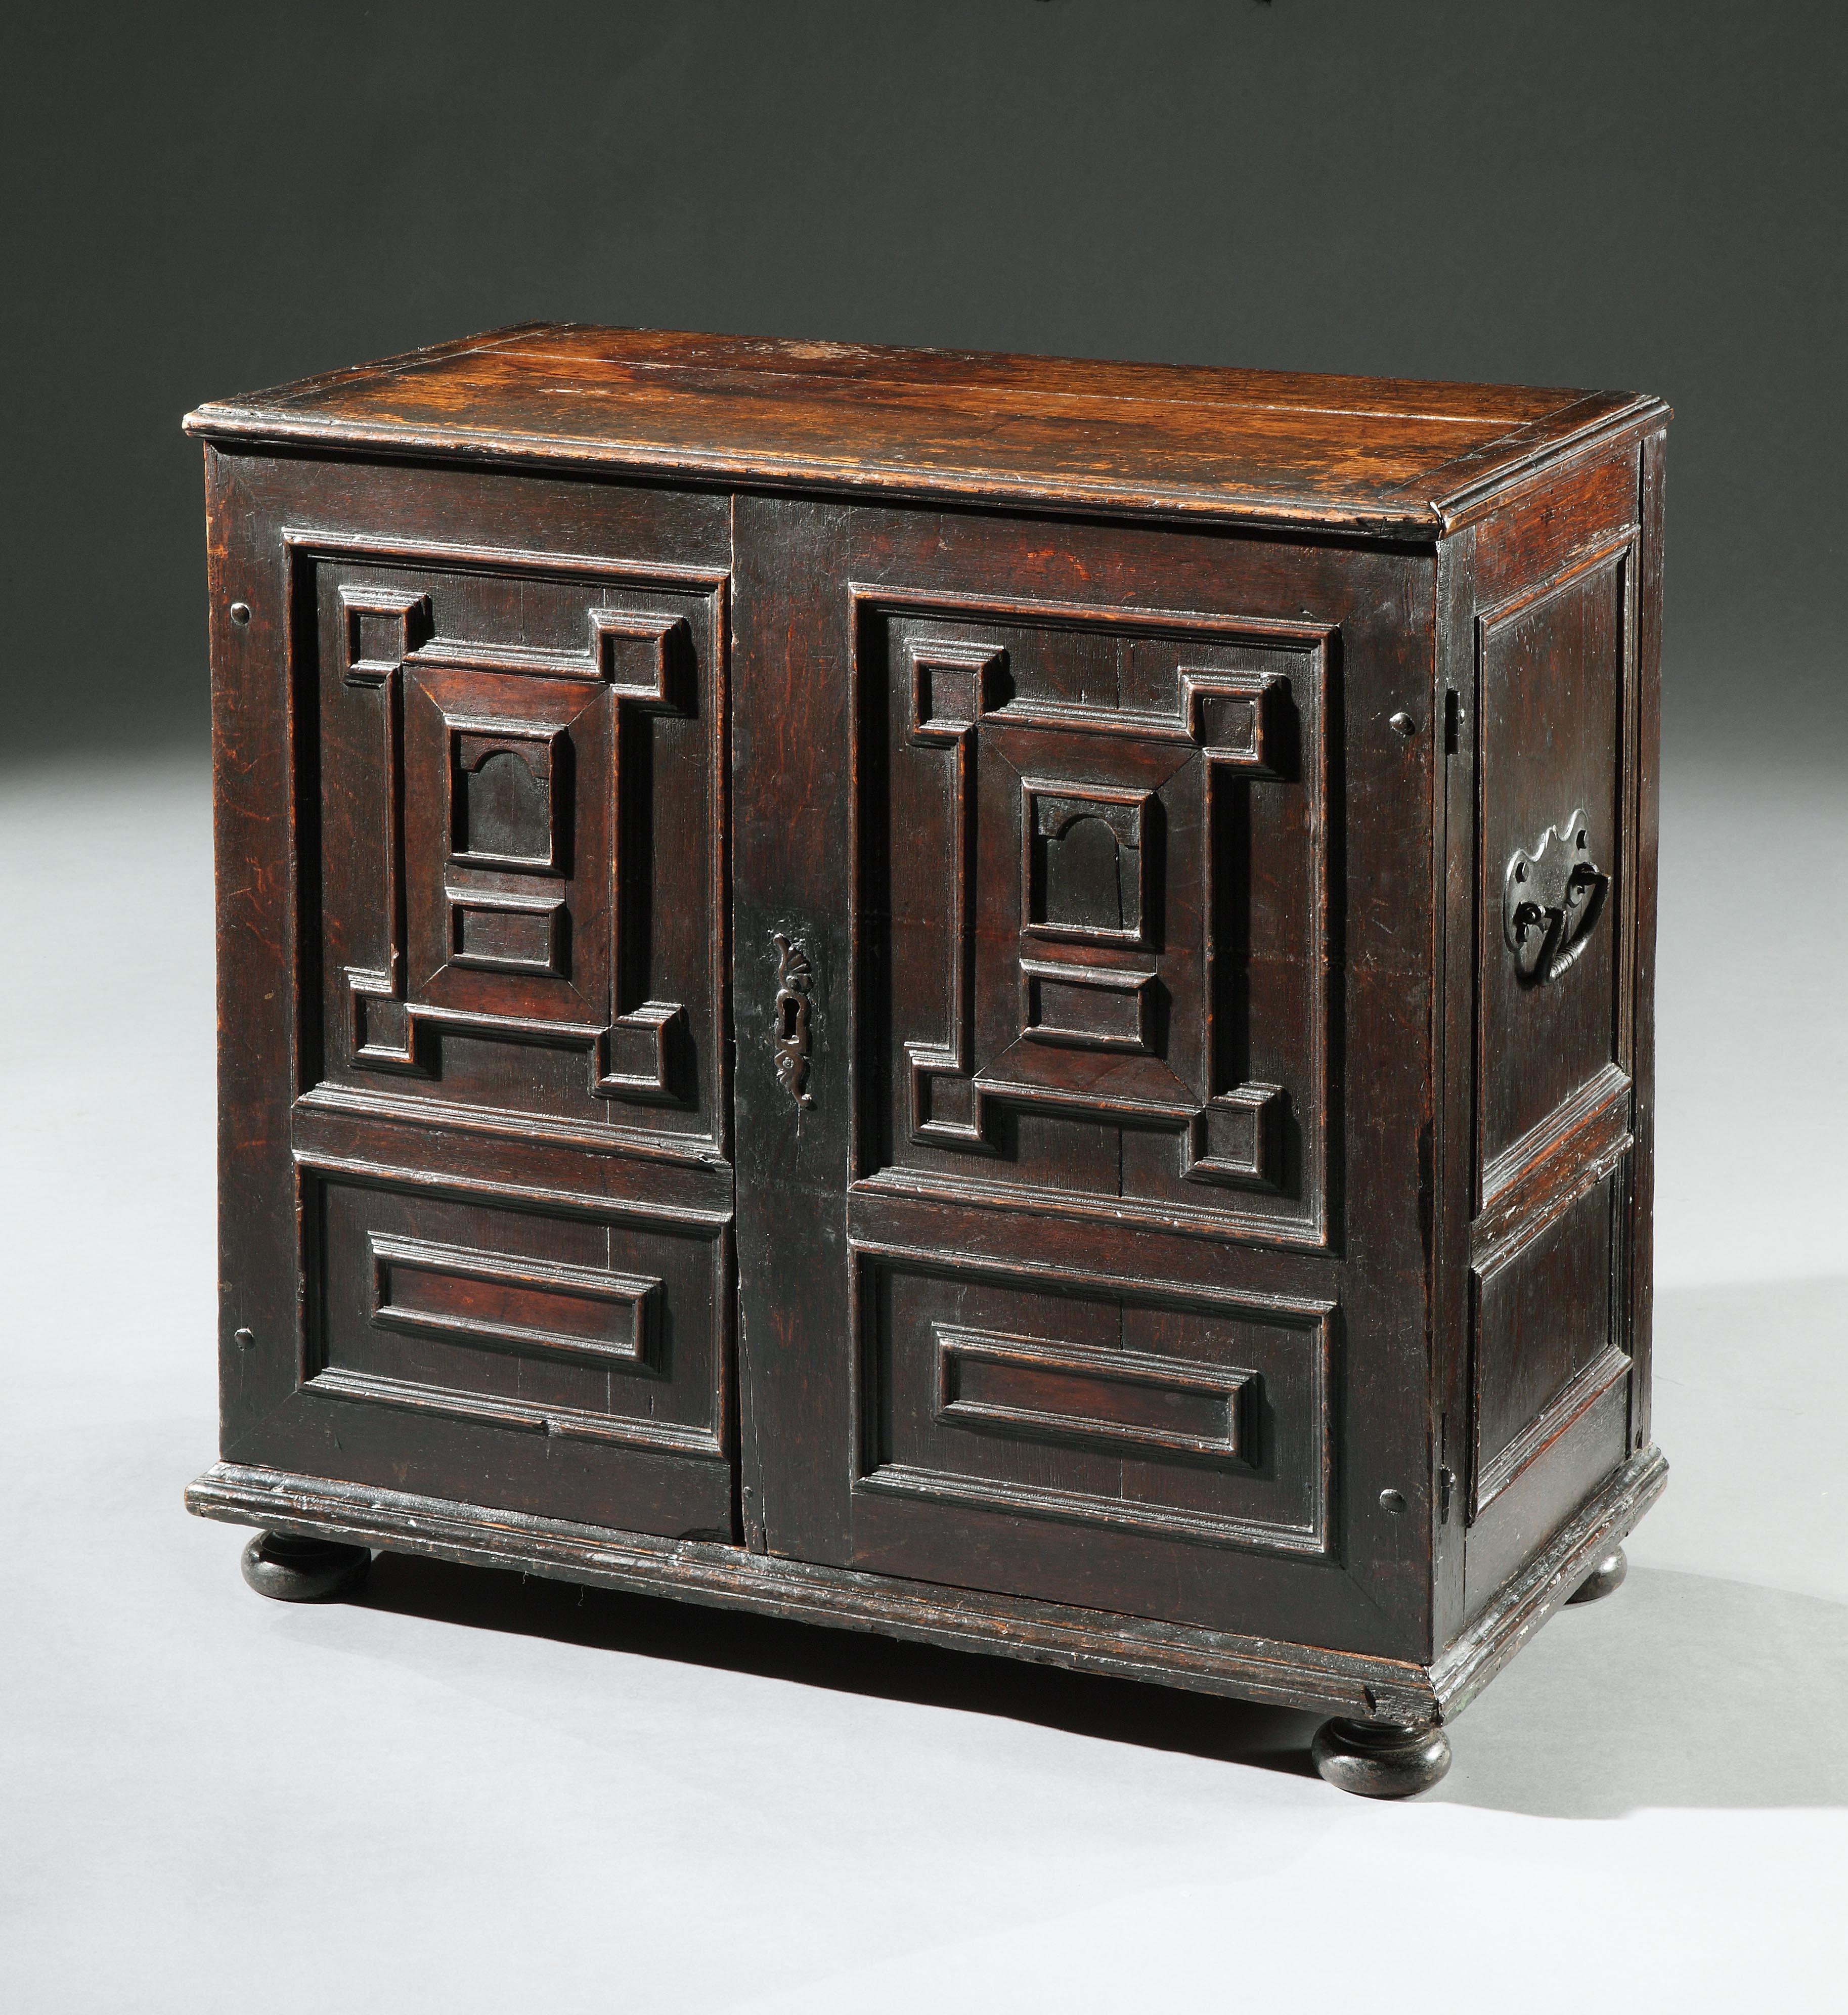 A late 17th century, oak cabinet with a fitted, teak interior enclosing secret drawers

The plank top in two sections, cleated and faced with a moulded edge. The cupboard with two doors decorated with applied, geometric mouldings. The hinges